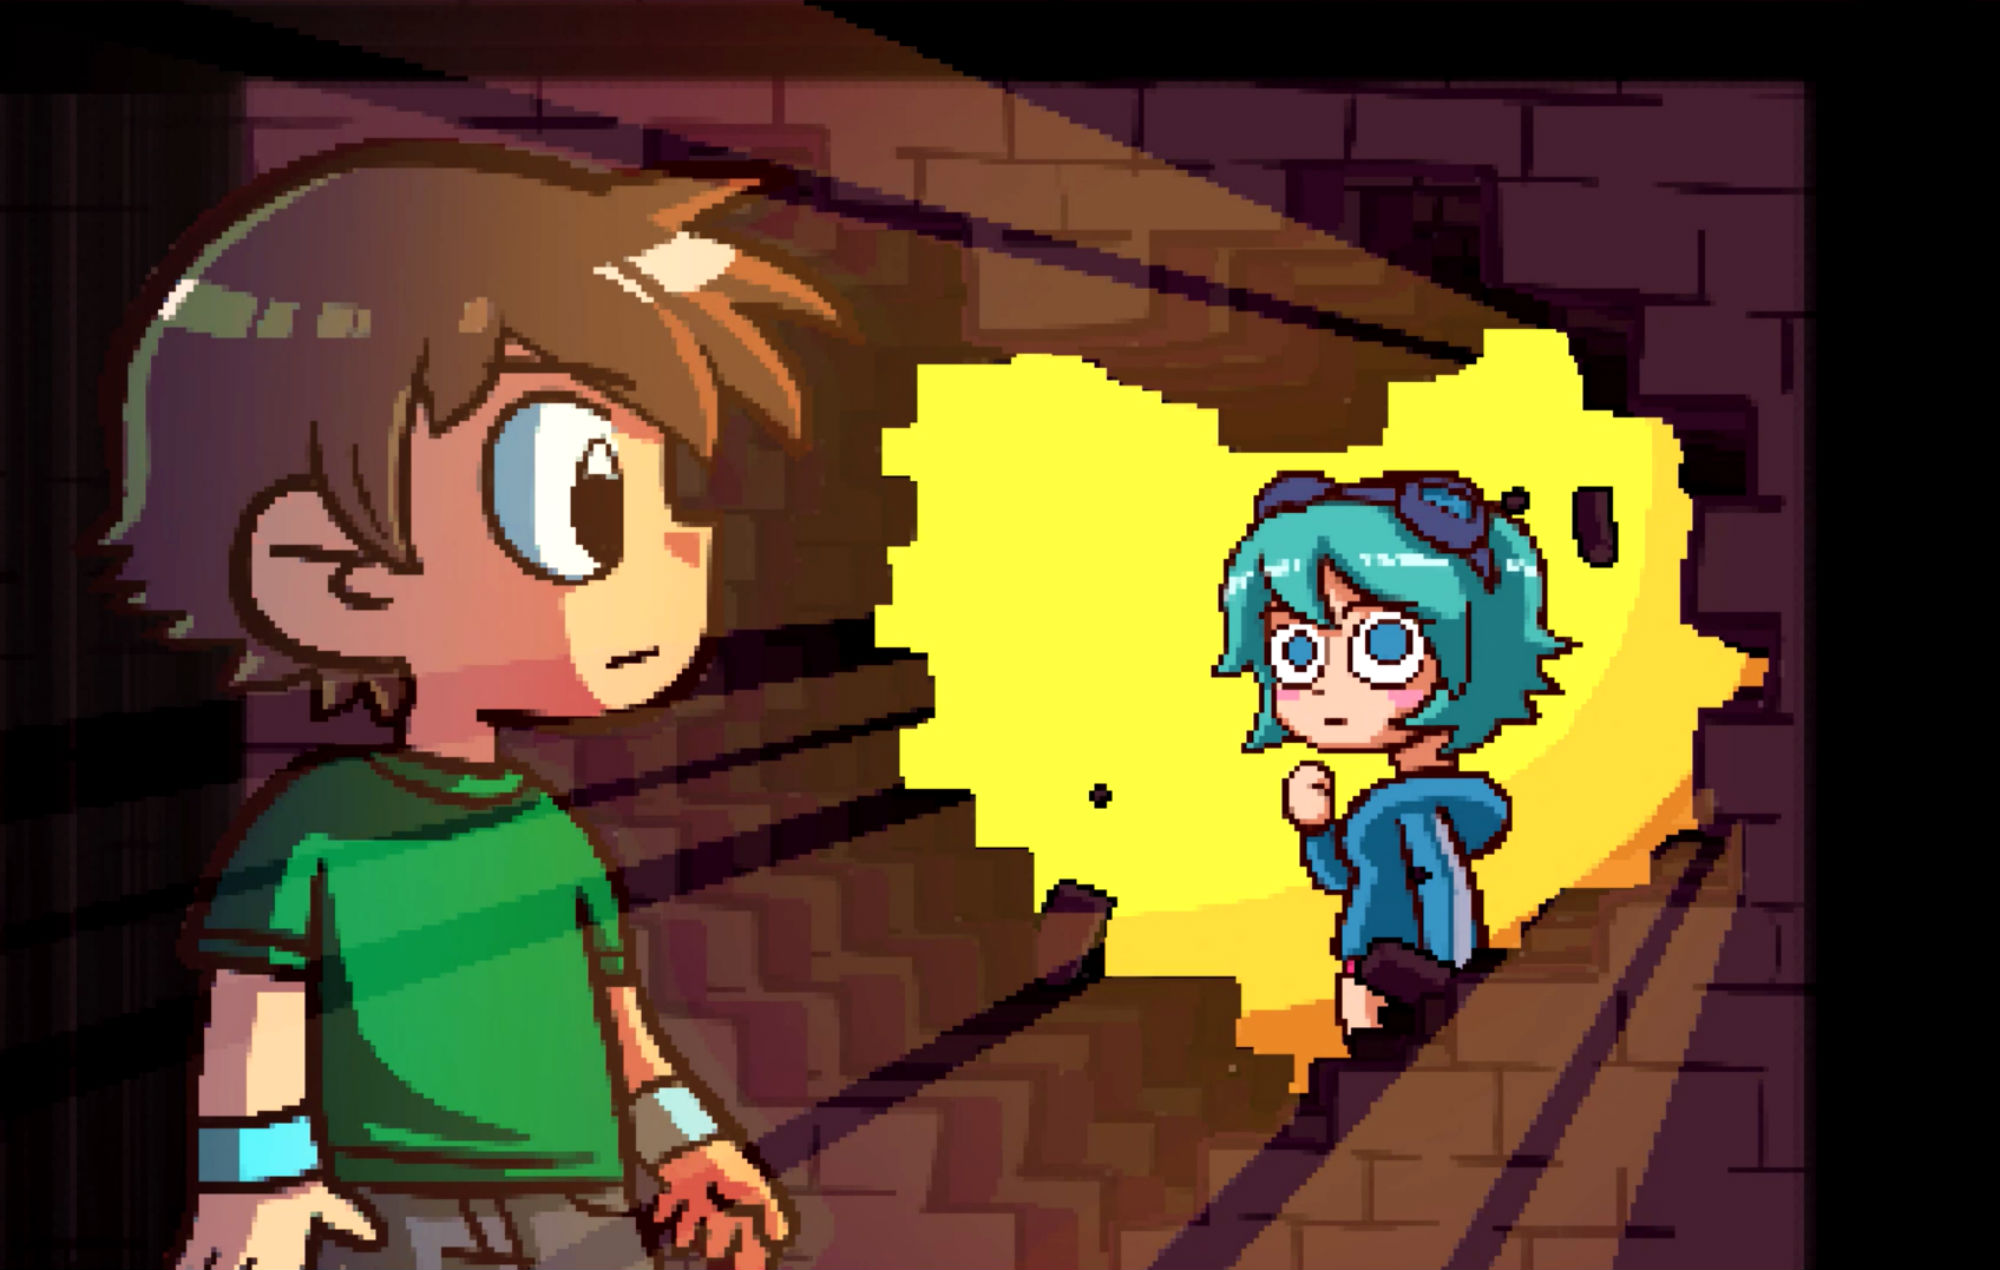 Scott Pilgrim and Ramona Flowers gaze at each other through a heart-shaped hole in a brick wall.